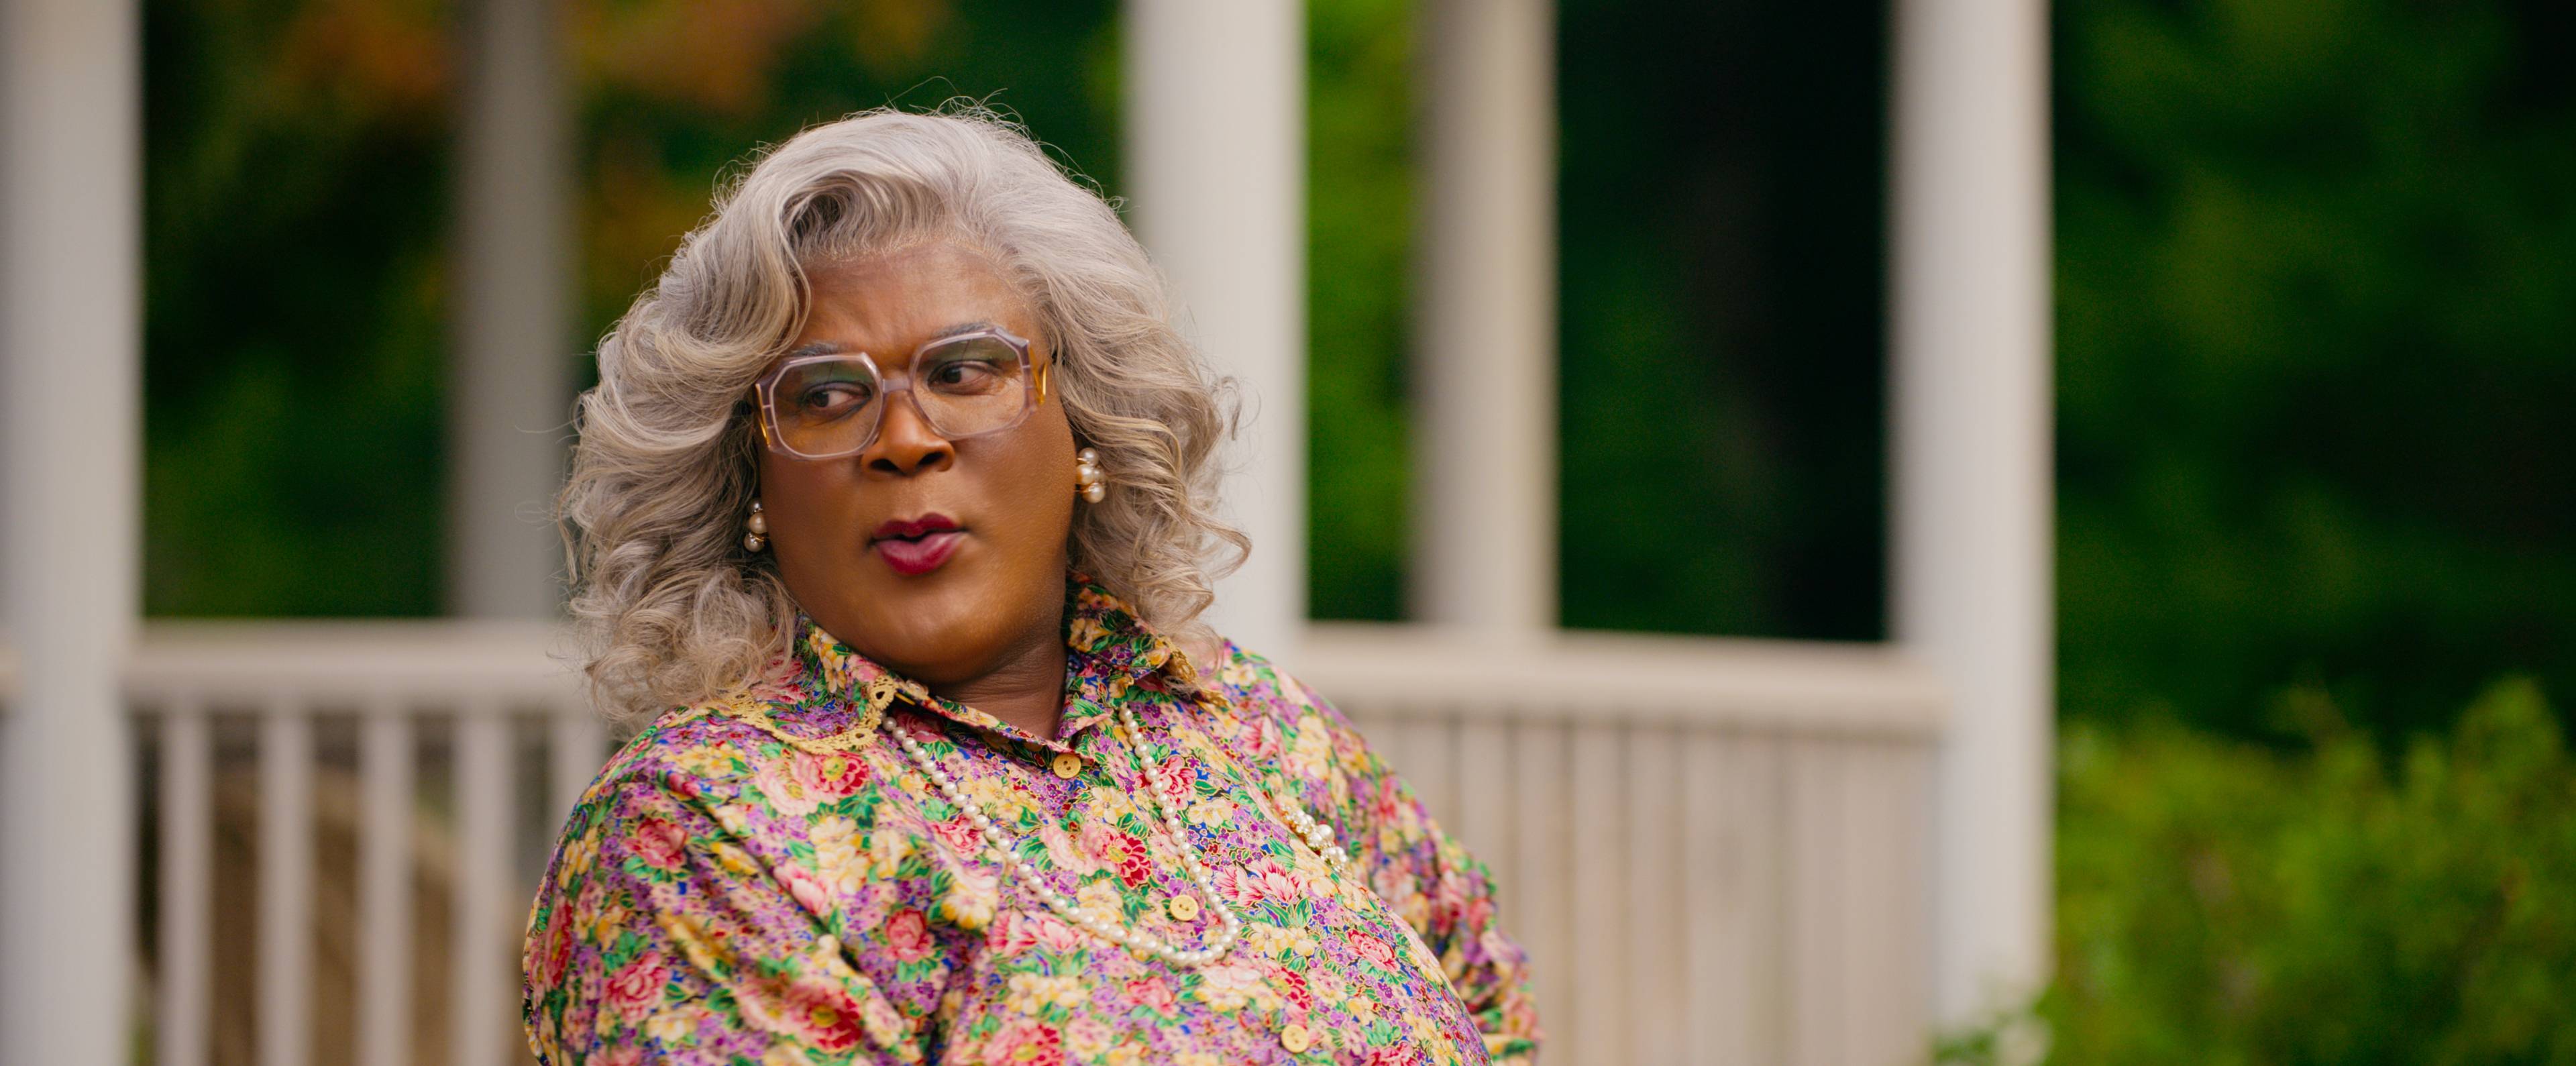 012622-tyler-perrys-a-madea-home-coming-to-debut-on-netflix